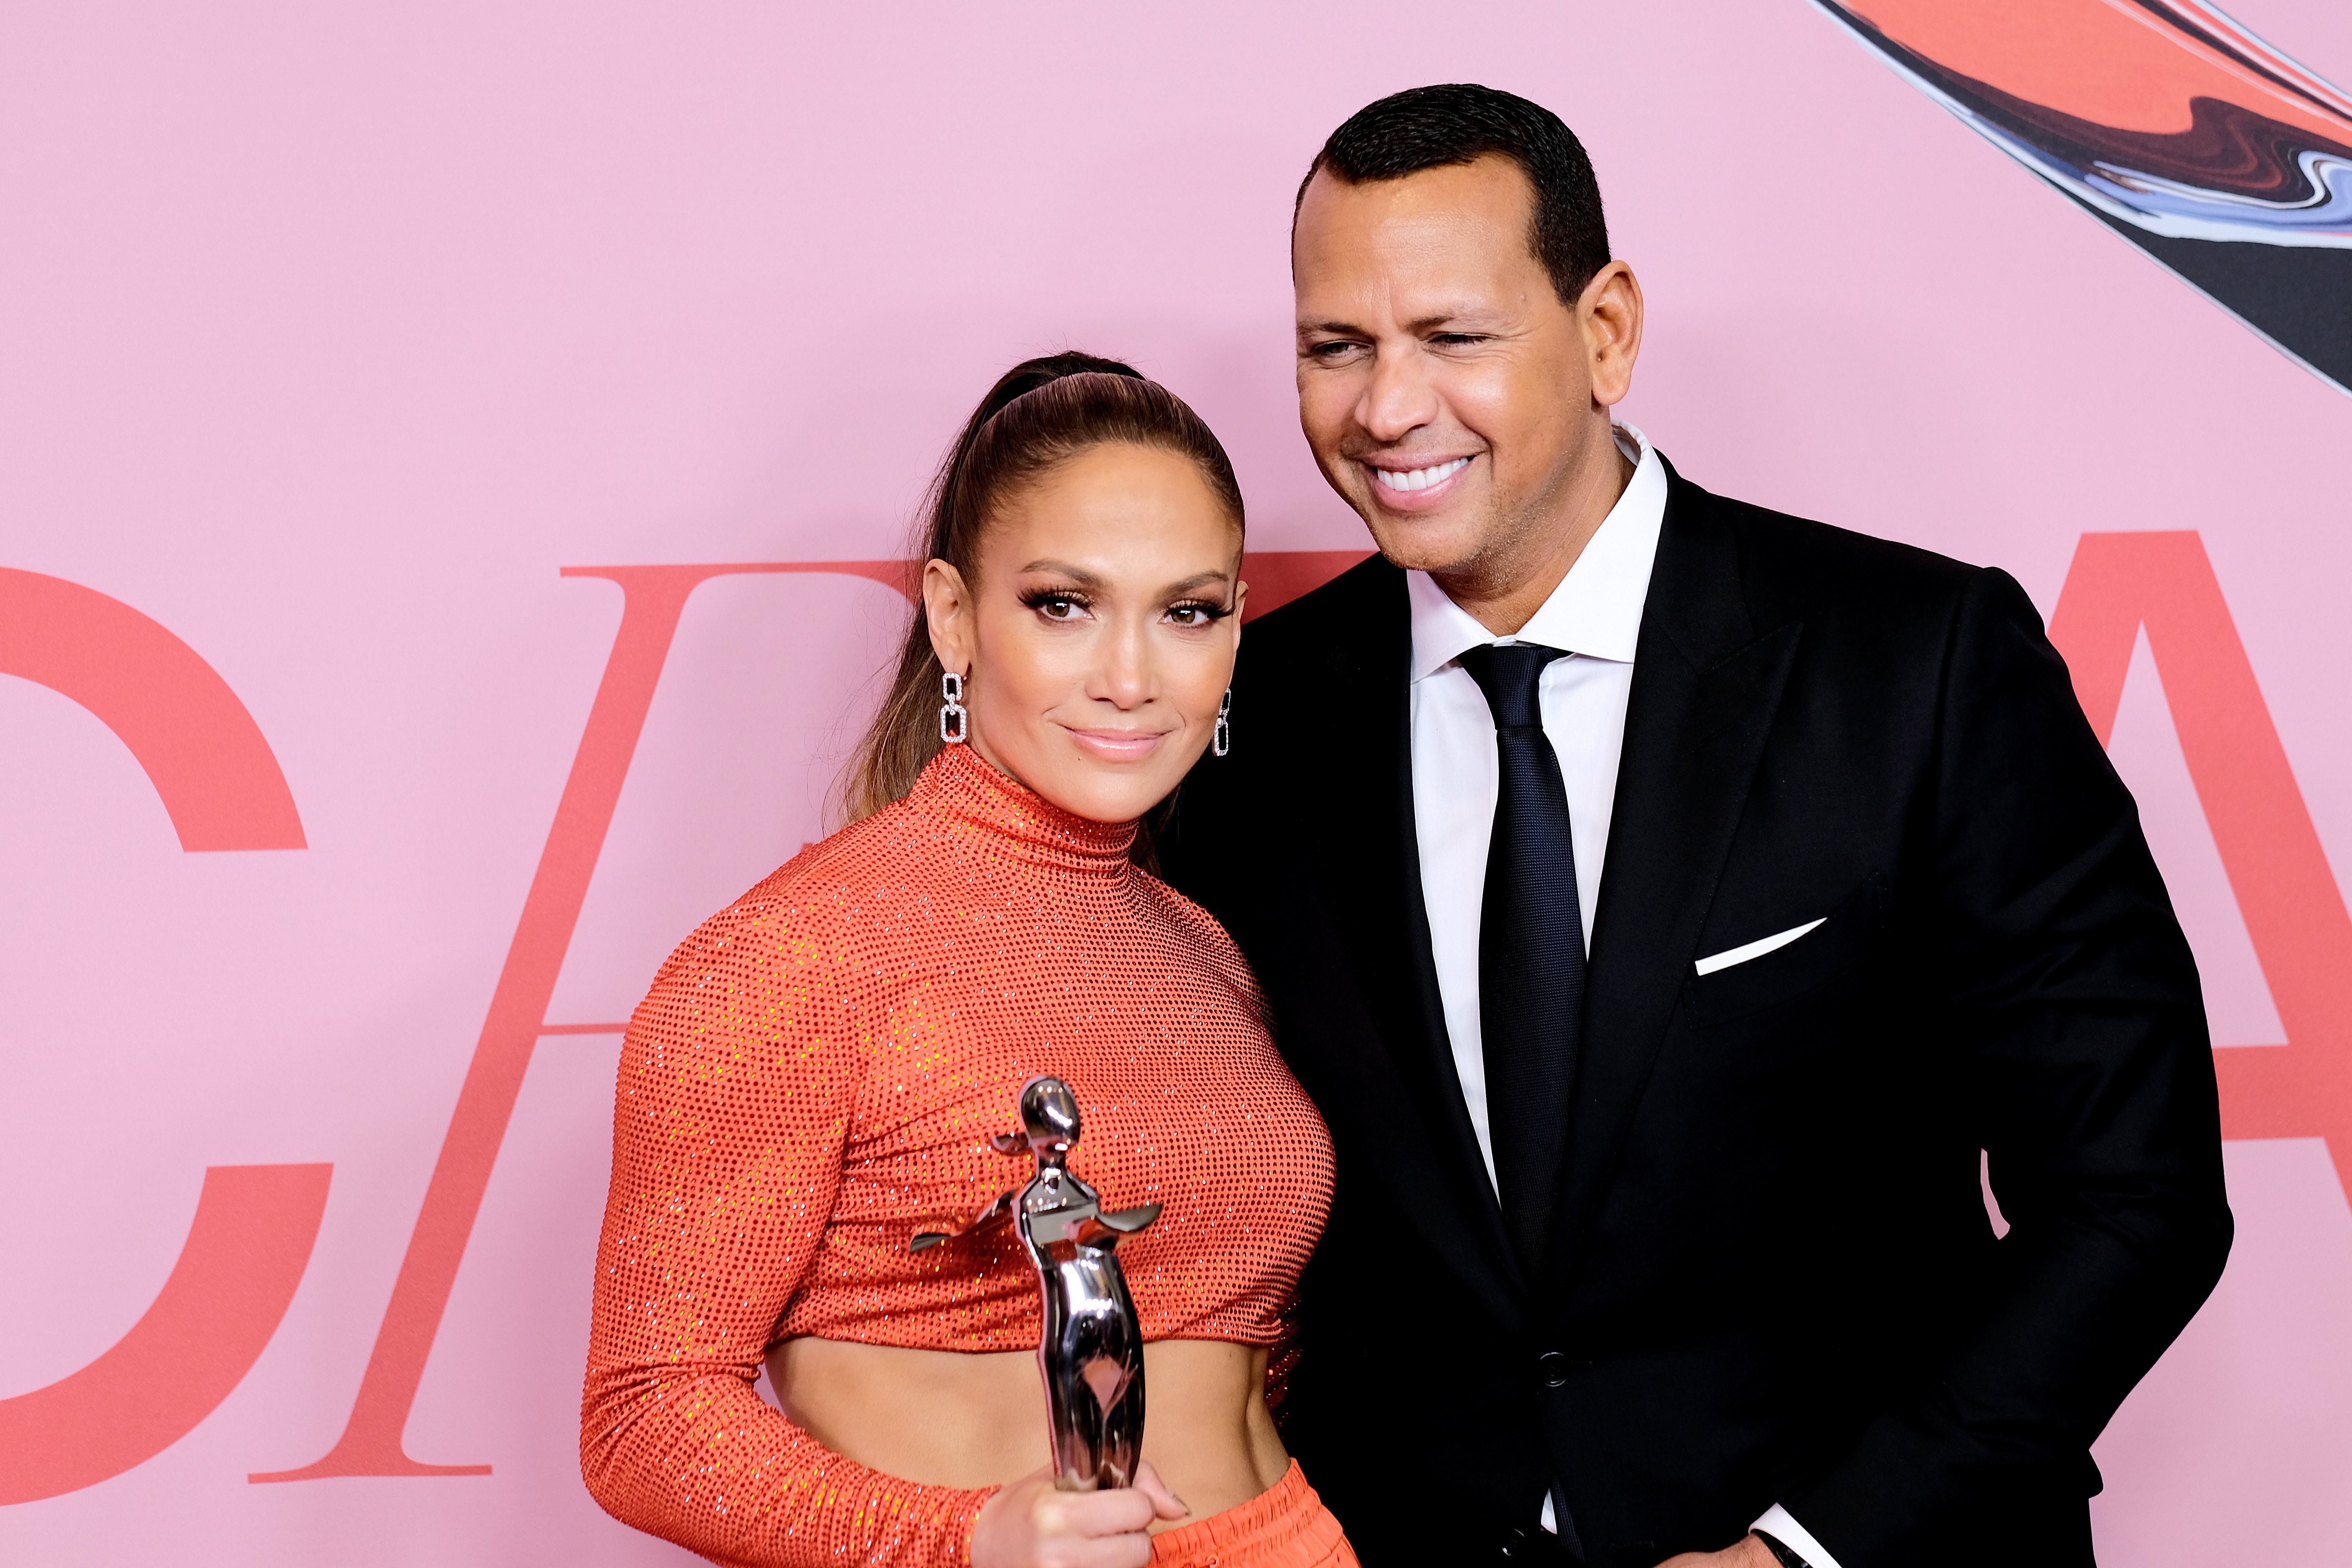 Jennifer Lopez poses with the Fashion Icon Award and Alex Rodriguez during Winners Walk during the CFDA Fashion Awards at the Brooklyn Museum of Art on June 03, 2019, in New York City. | Source: Getty Images.